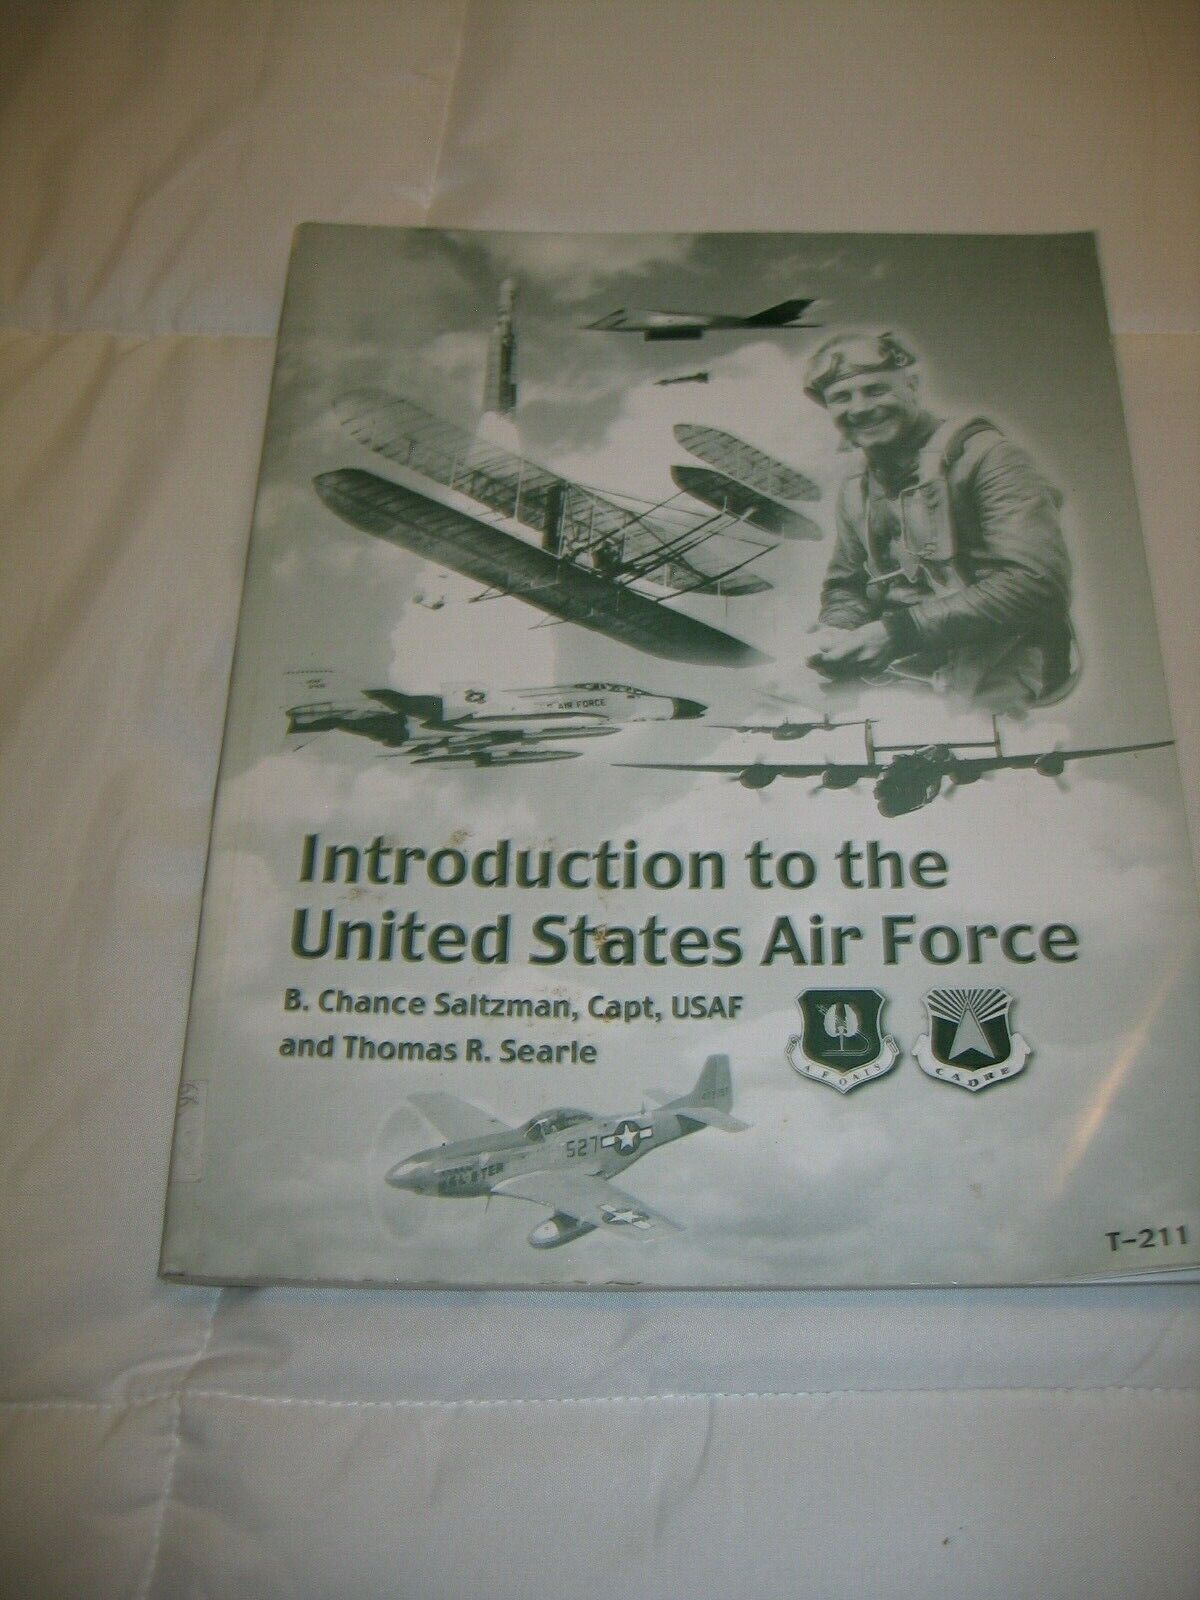 Introduction to the United States Air Force Book 2003 USAF